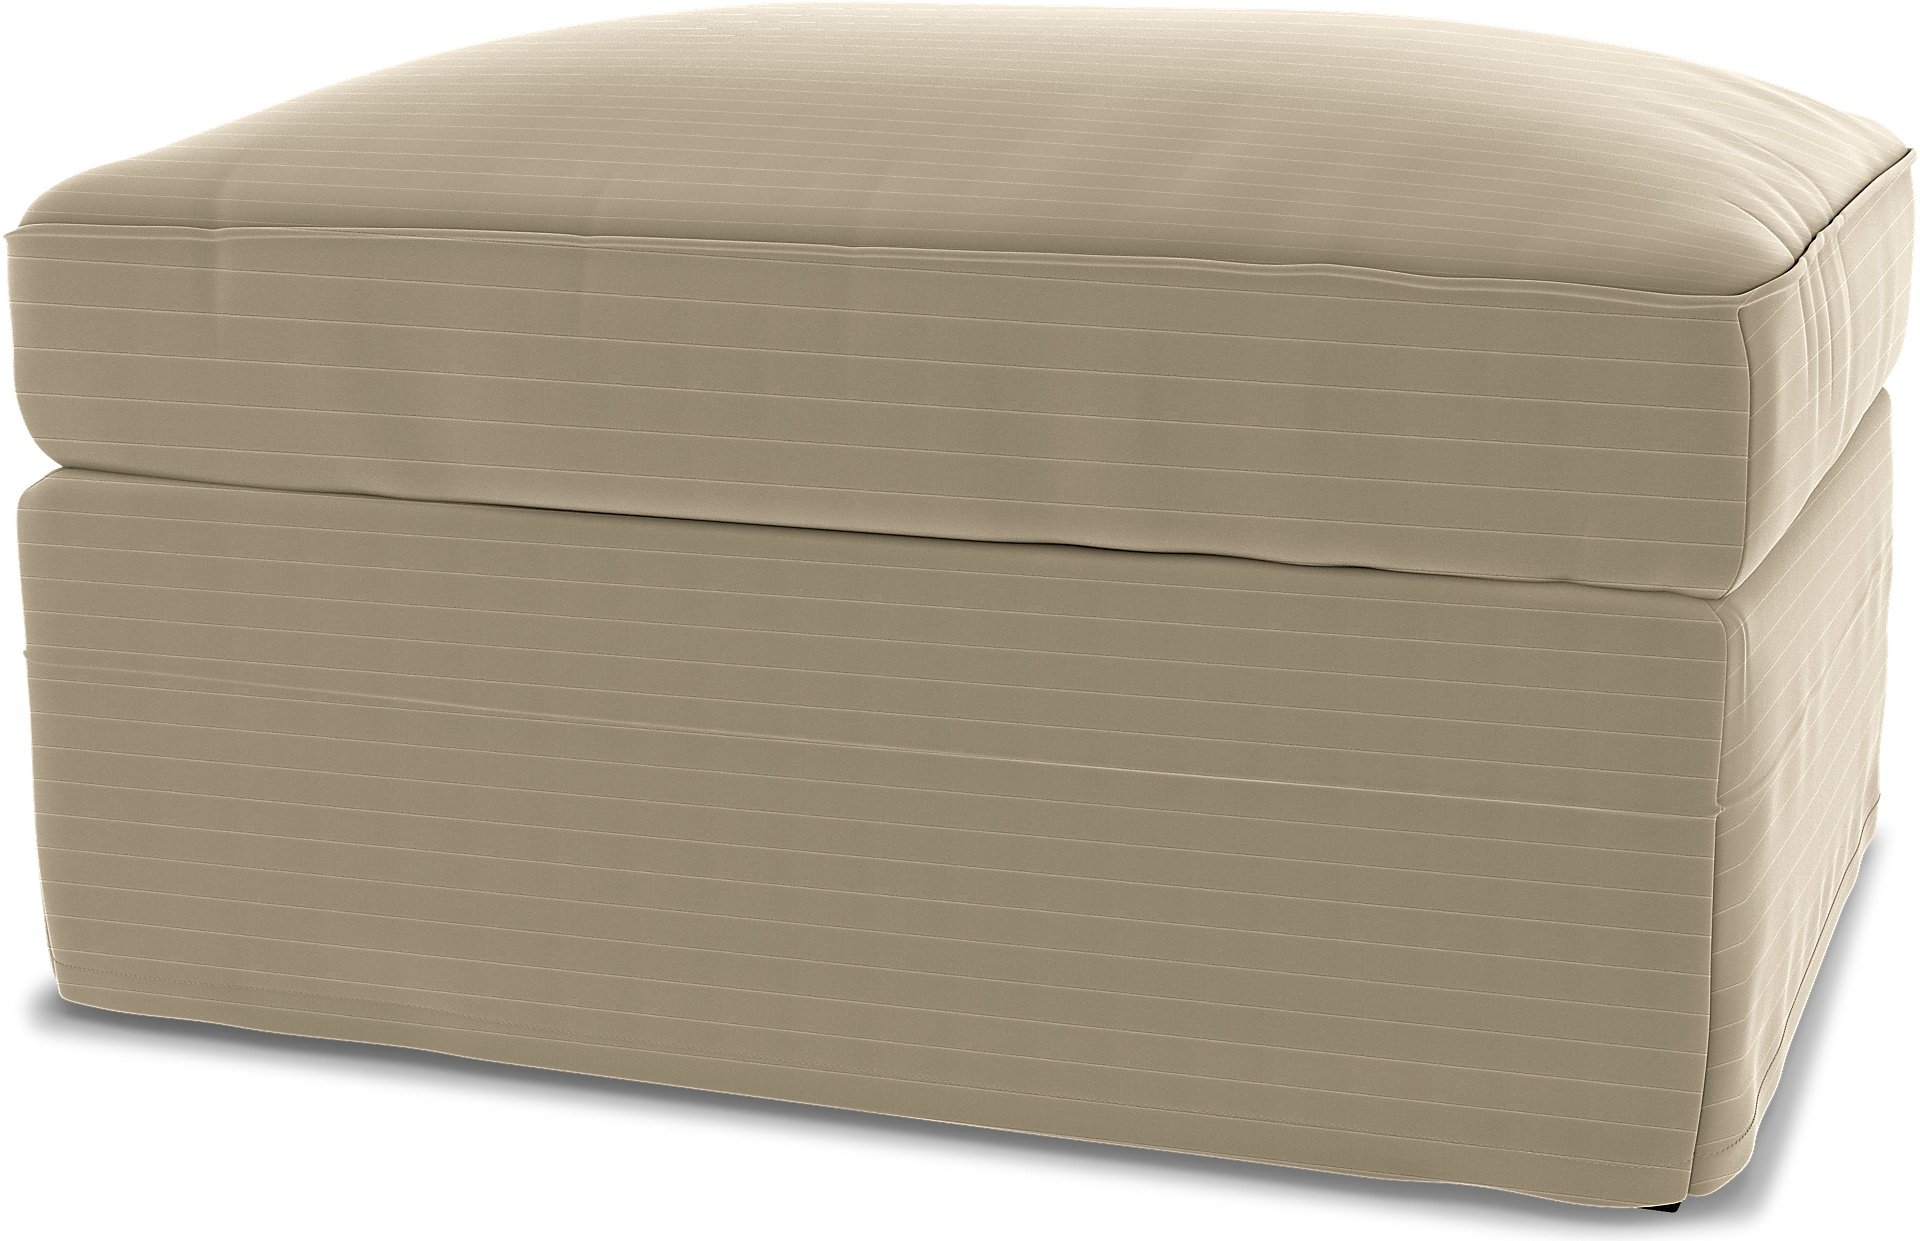 IKEA - Gronlid Footstool with Storage Cover, Oyster, Velvet - Bemz